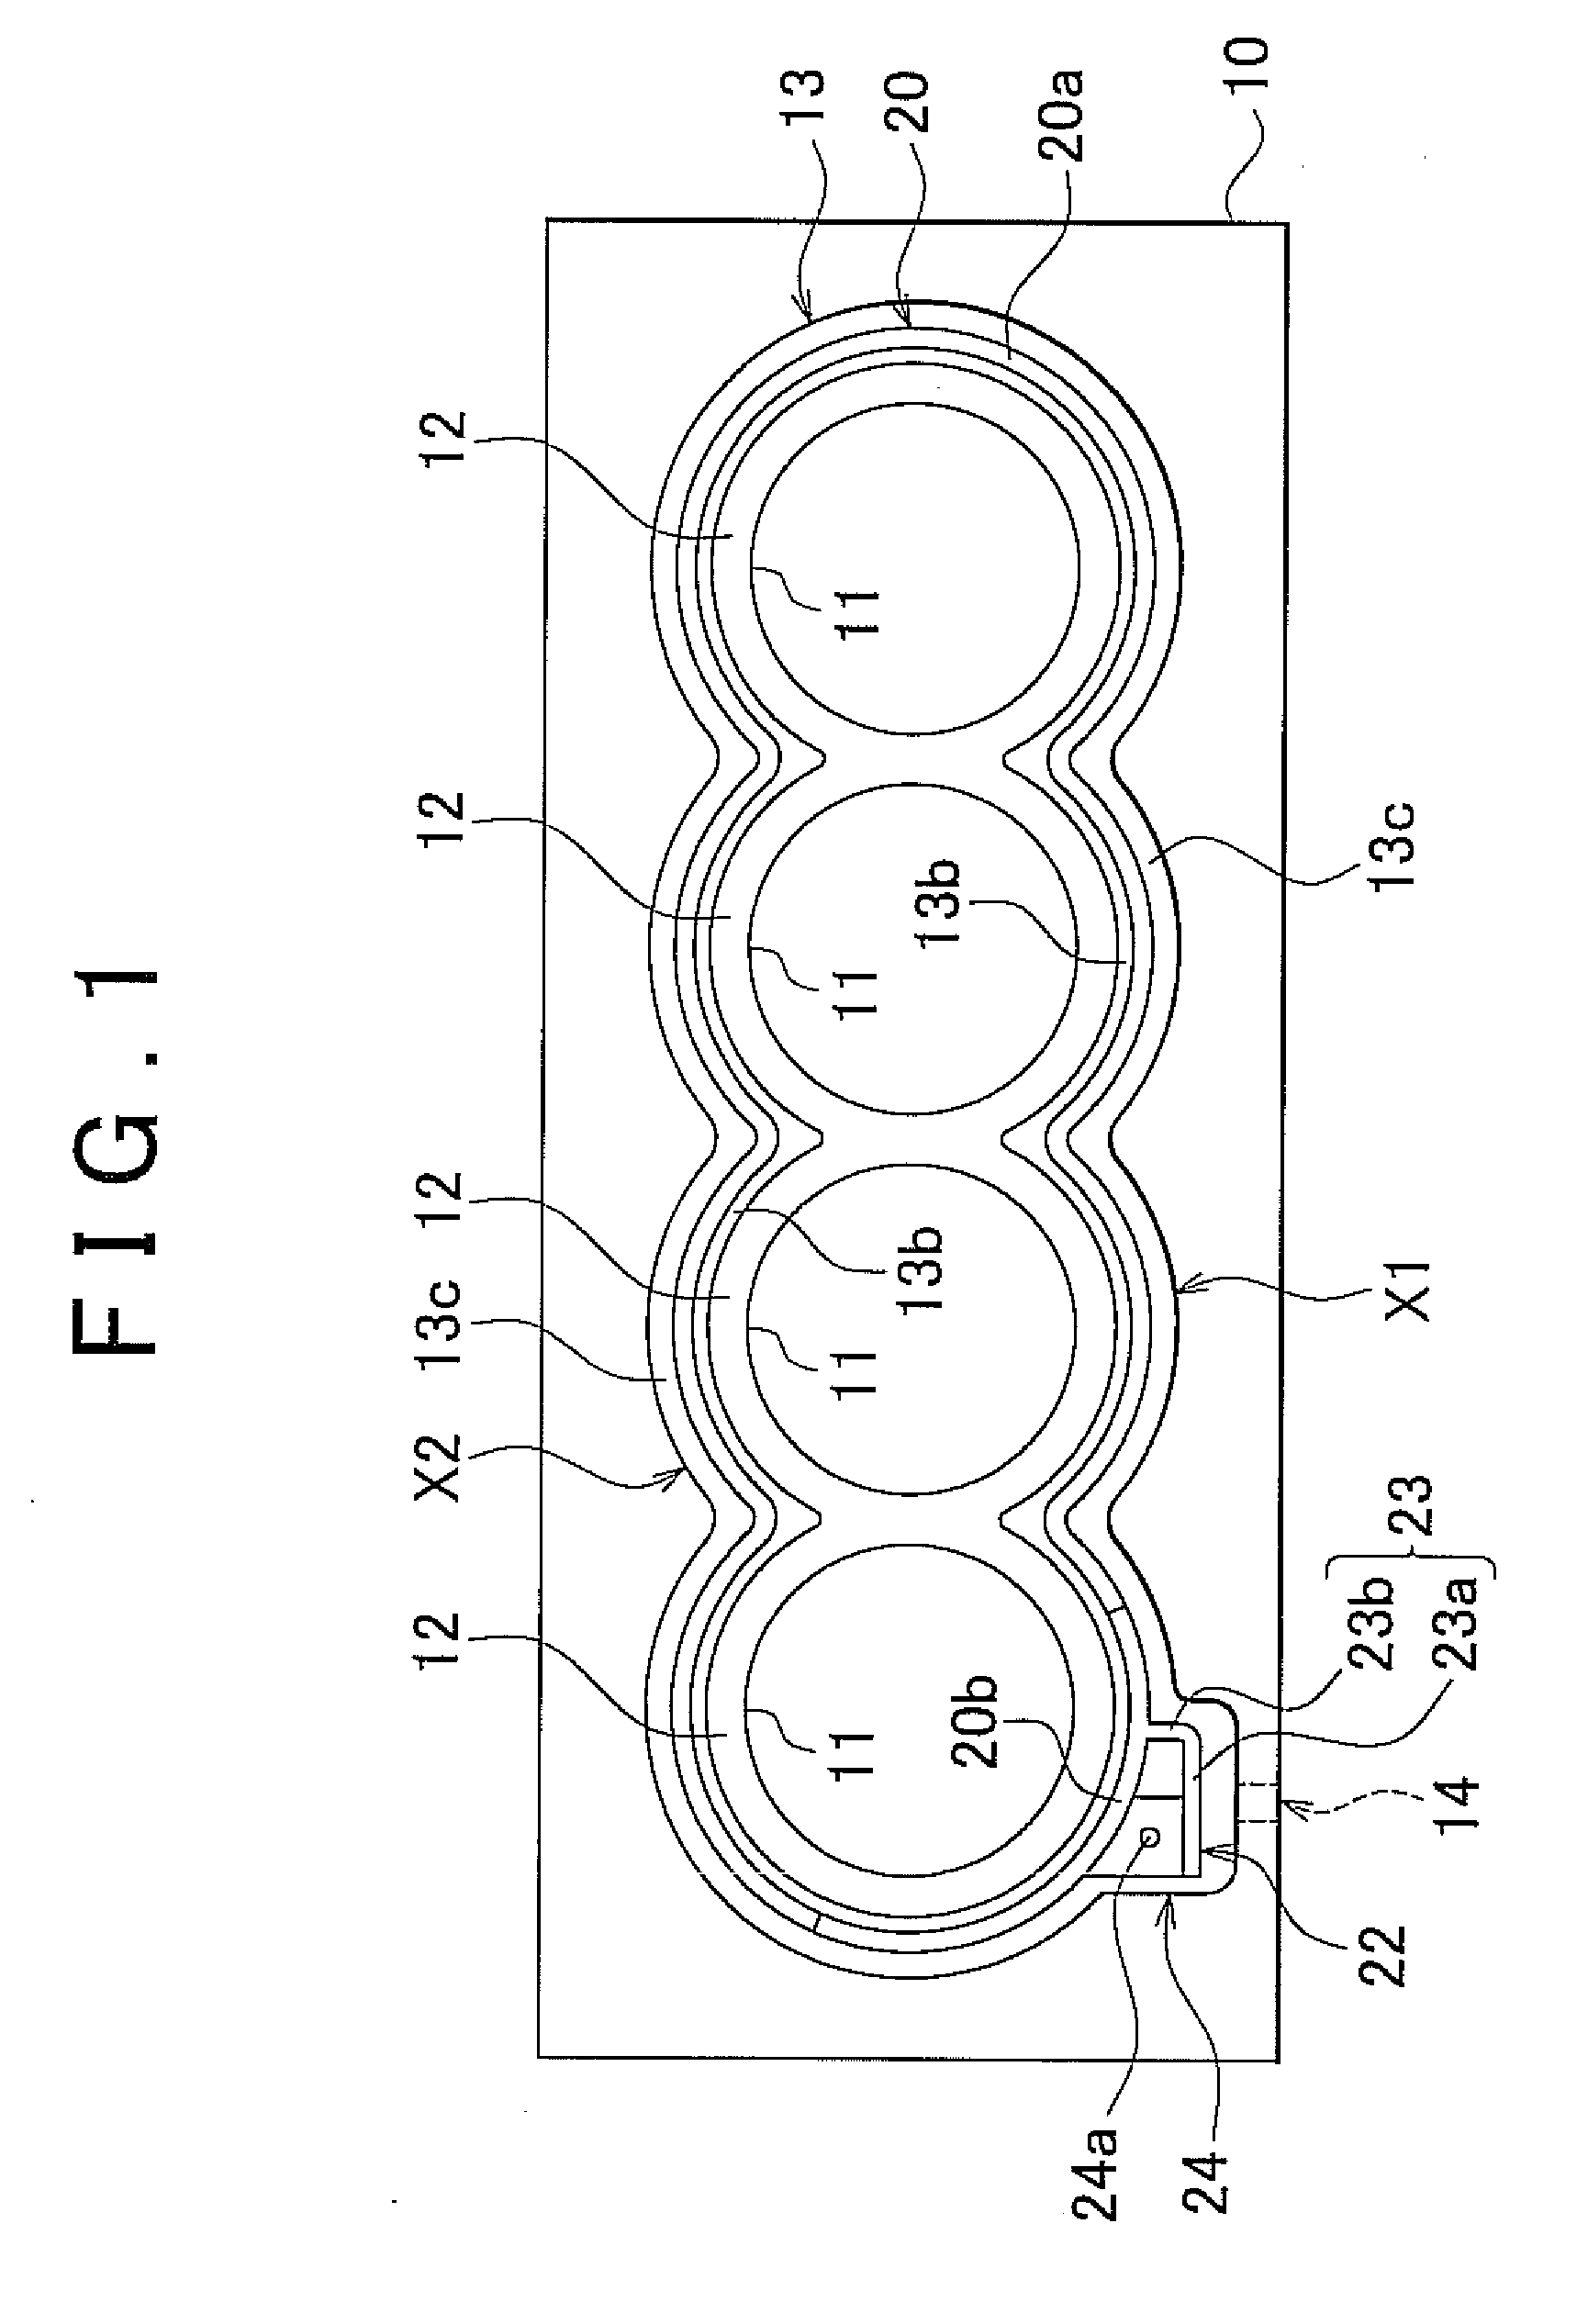 Cooling structure of internal combustion engine